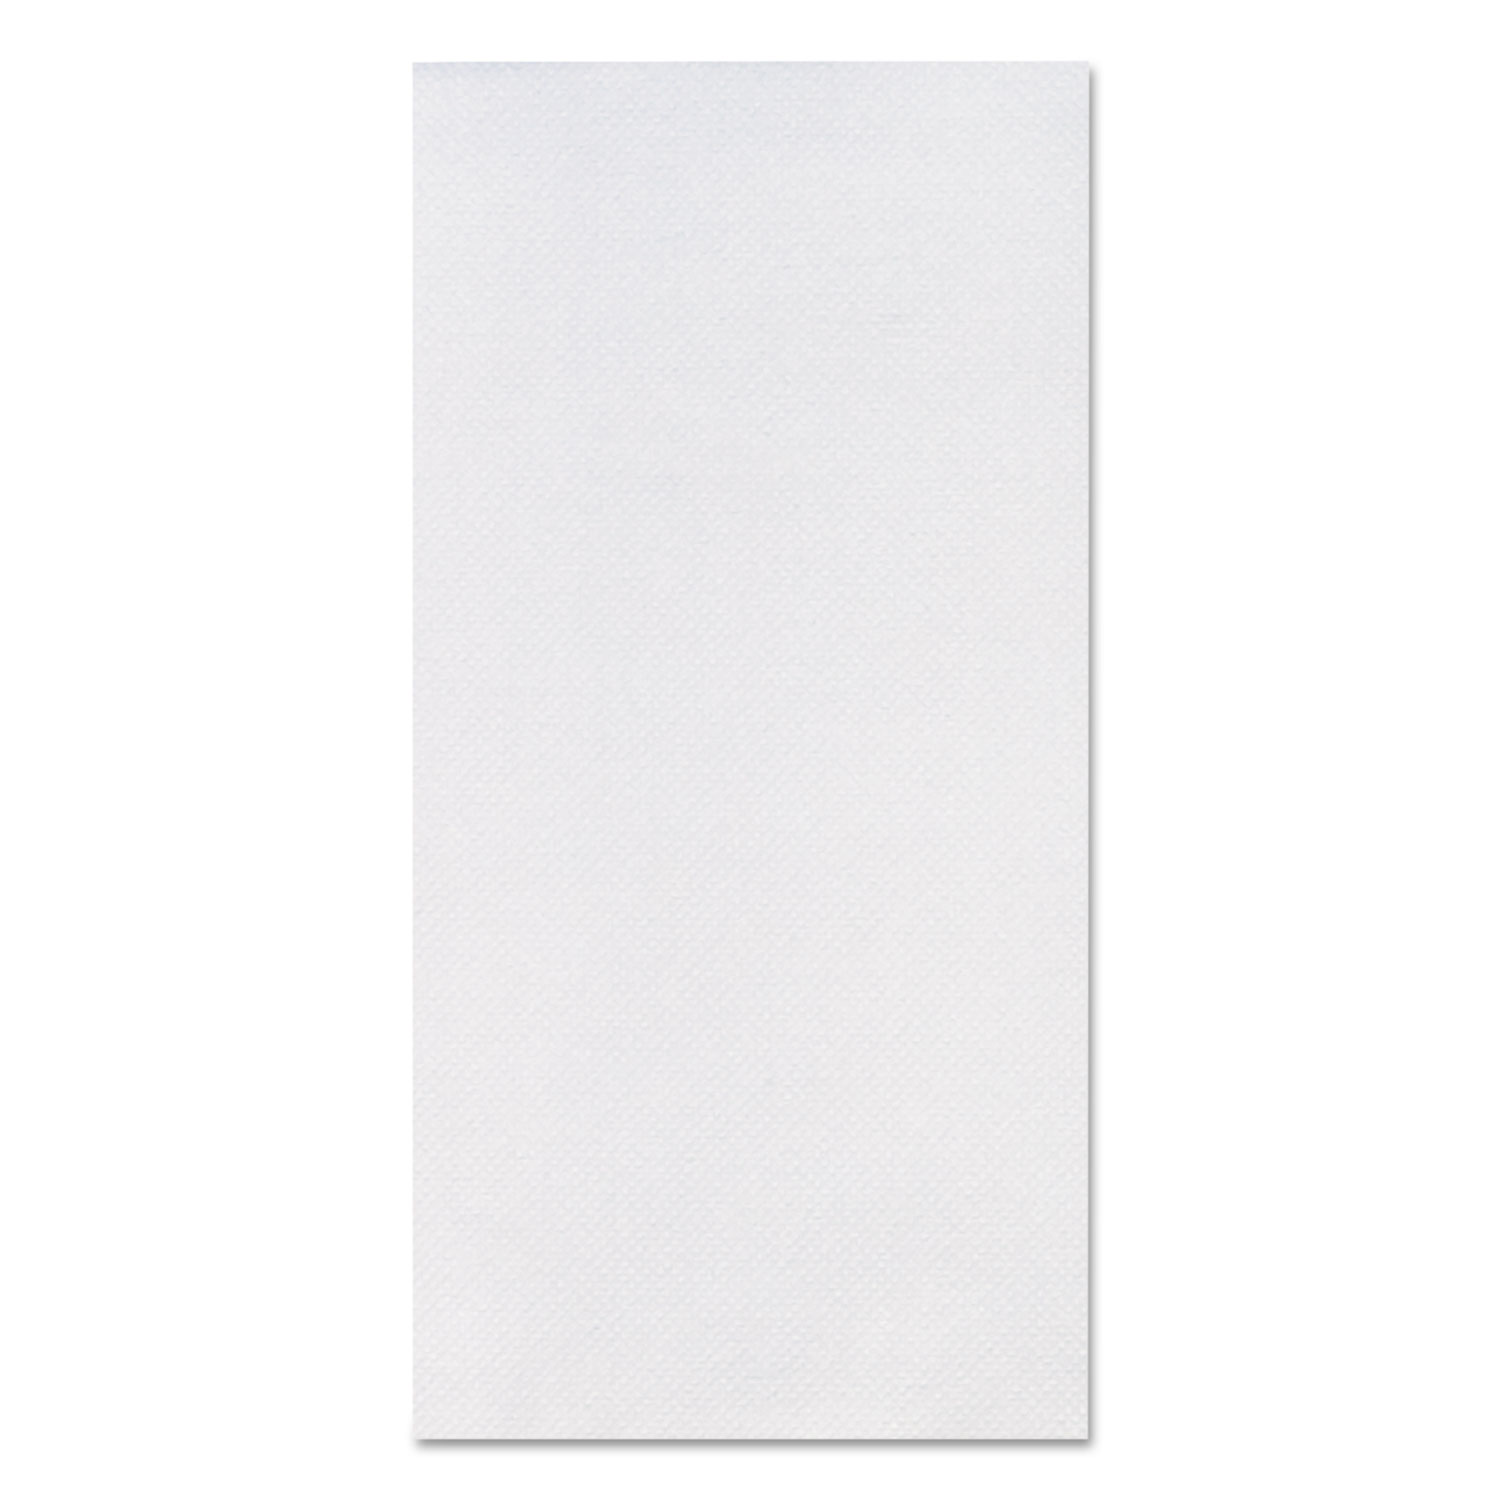  Hoffmaster FP1200 FashnPoint Guest Towels, 11 1/2 x 15 1/2, White, 100/Pack, 6 Packs/Carton (HFMFP1200) 